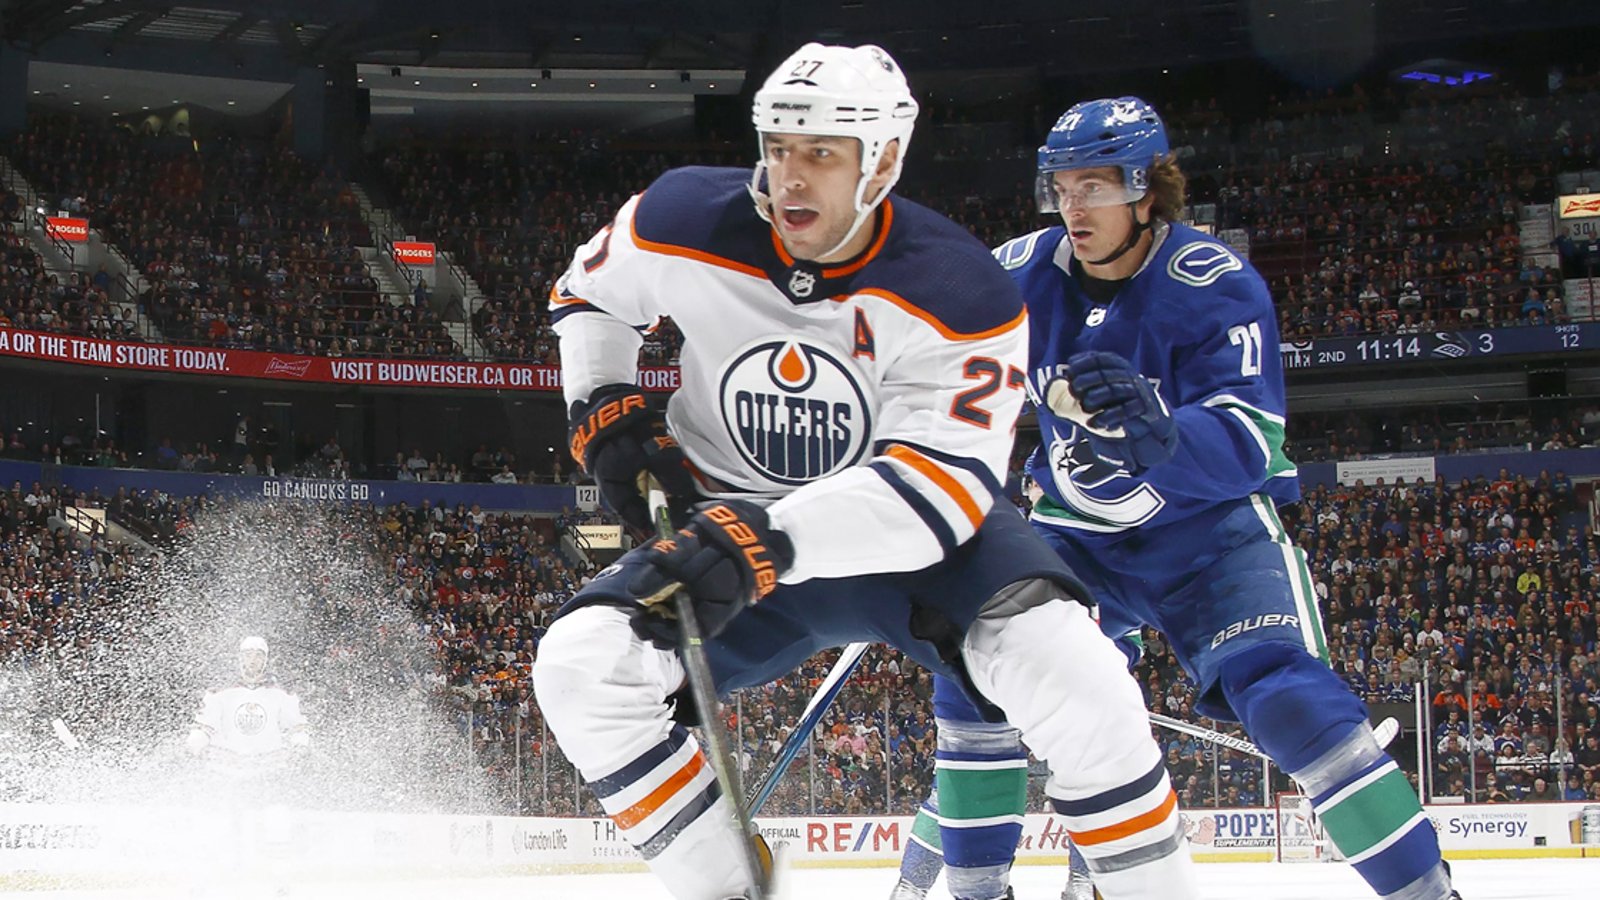 Report: Details of Oilers and Canucks trade talks emerge